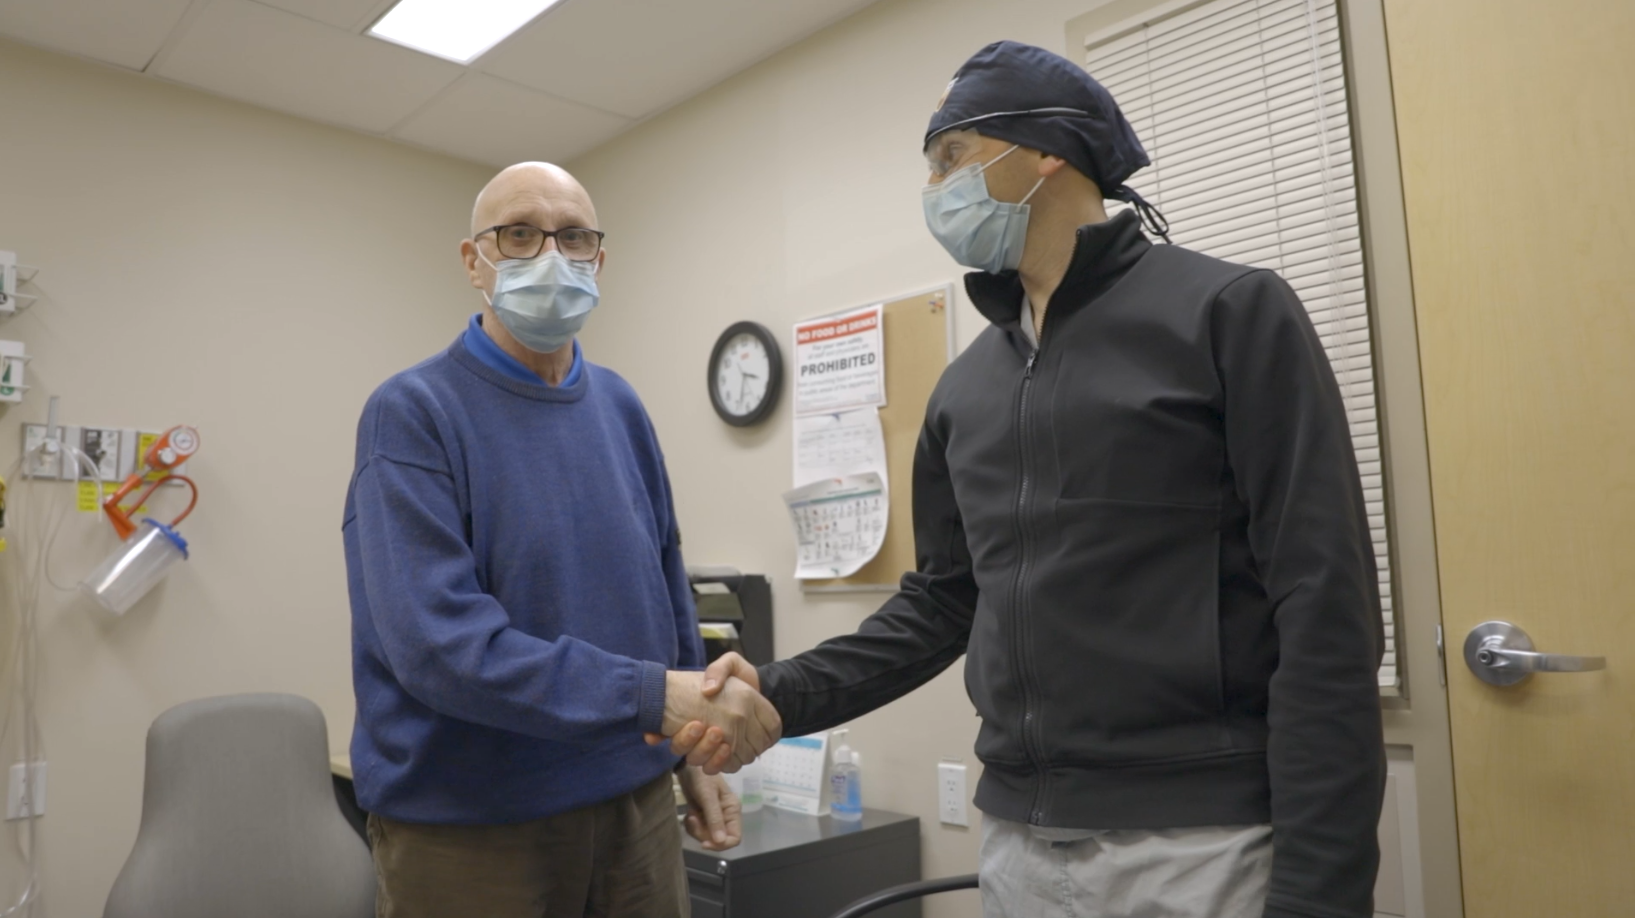 Dr. Waël Hanna stands on the right shaking hands with 74-year-old patient David Paterson 